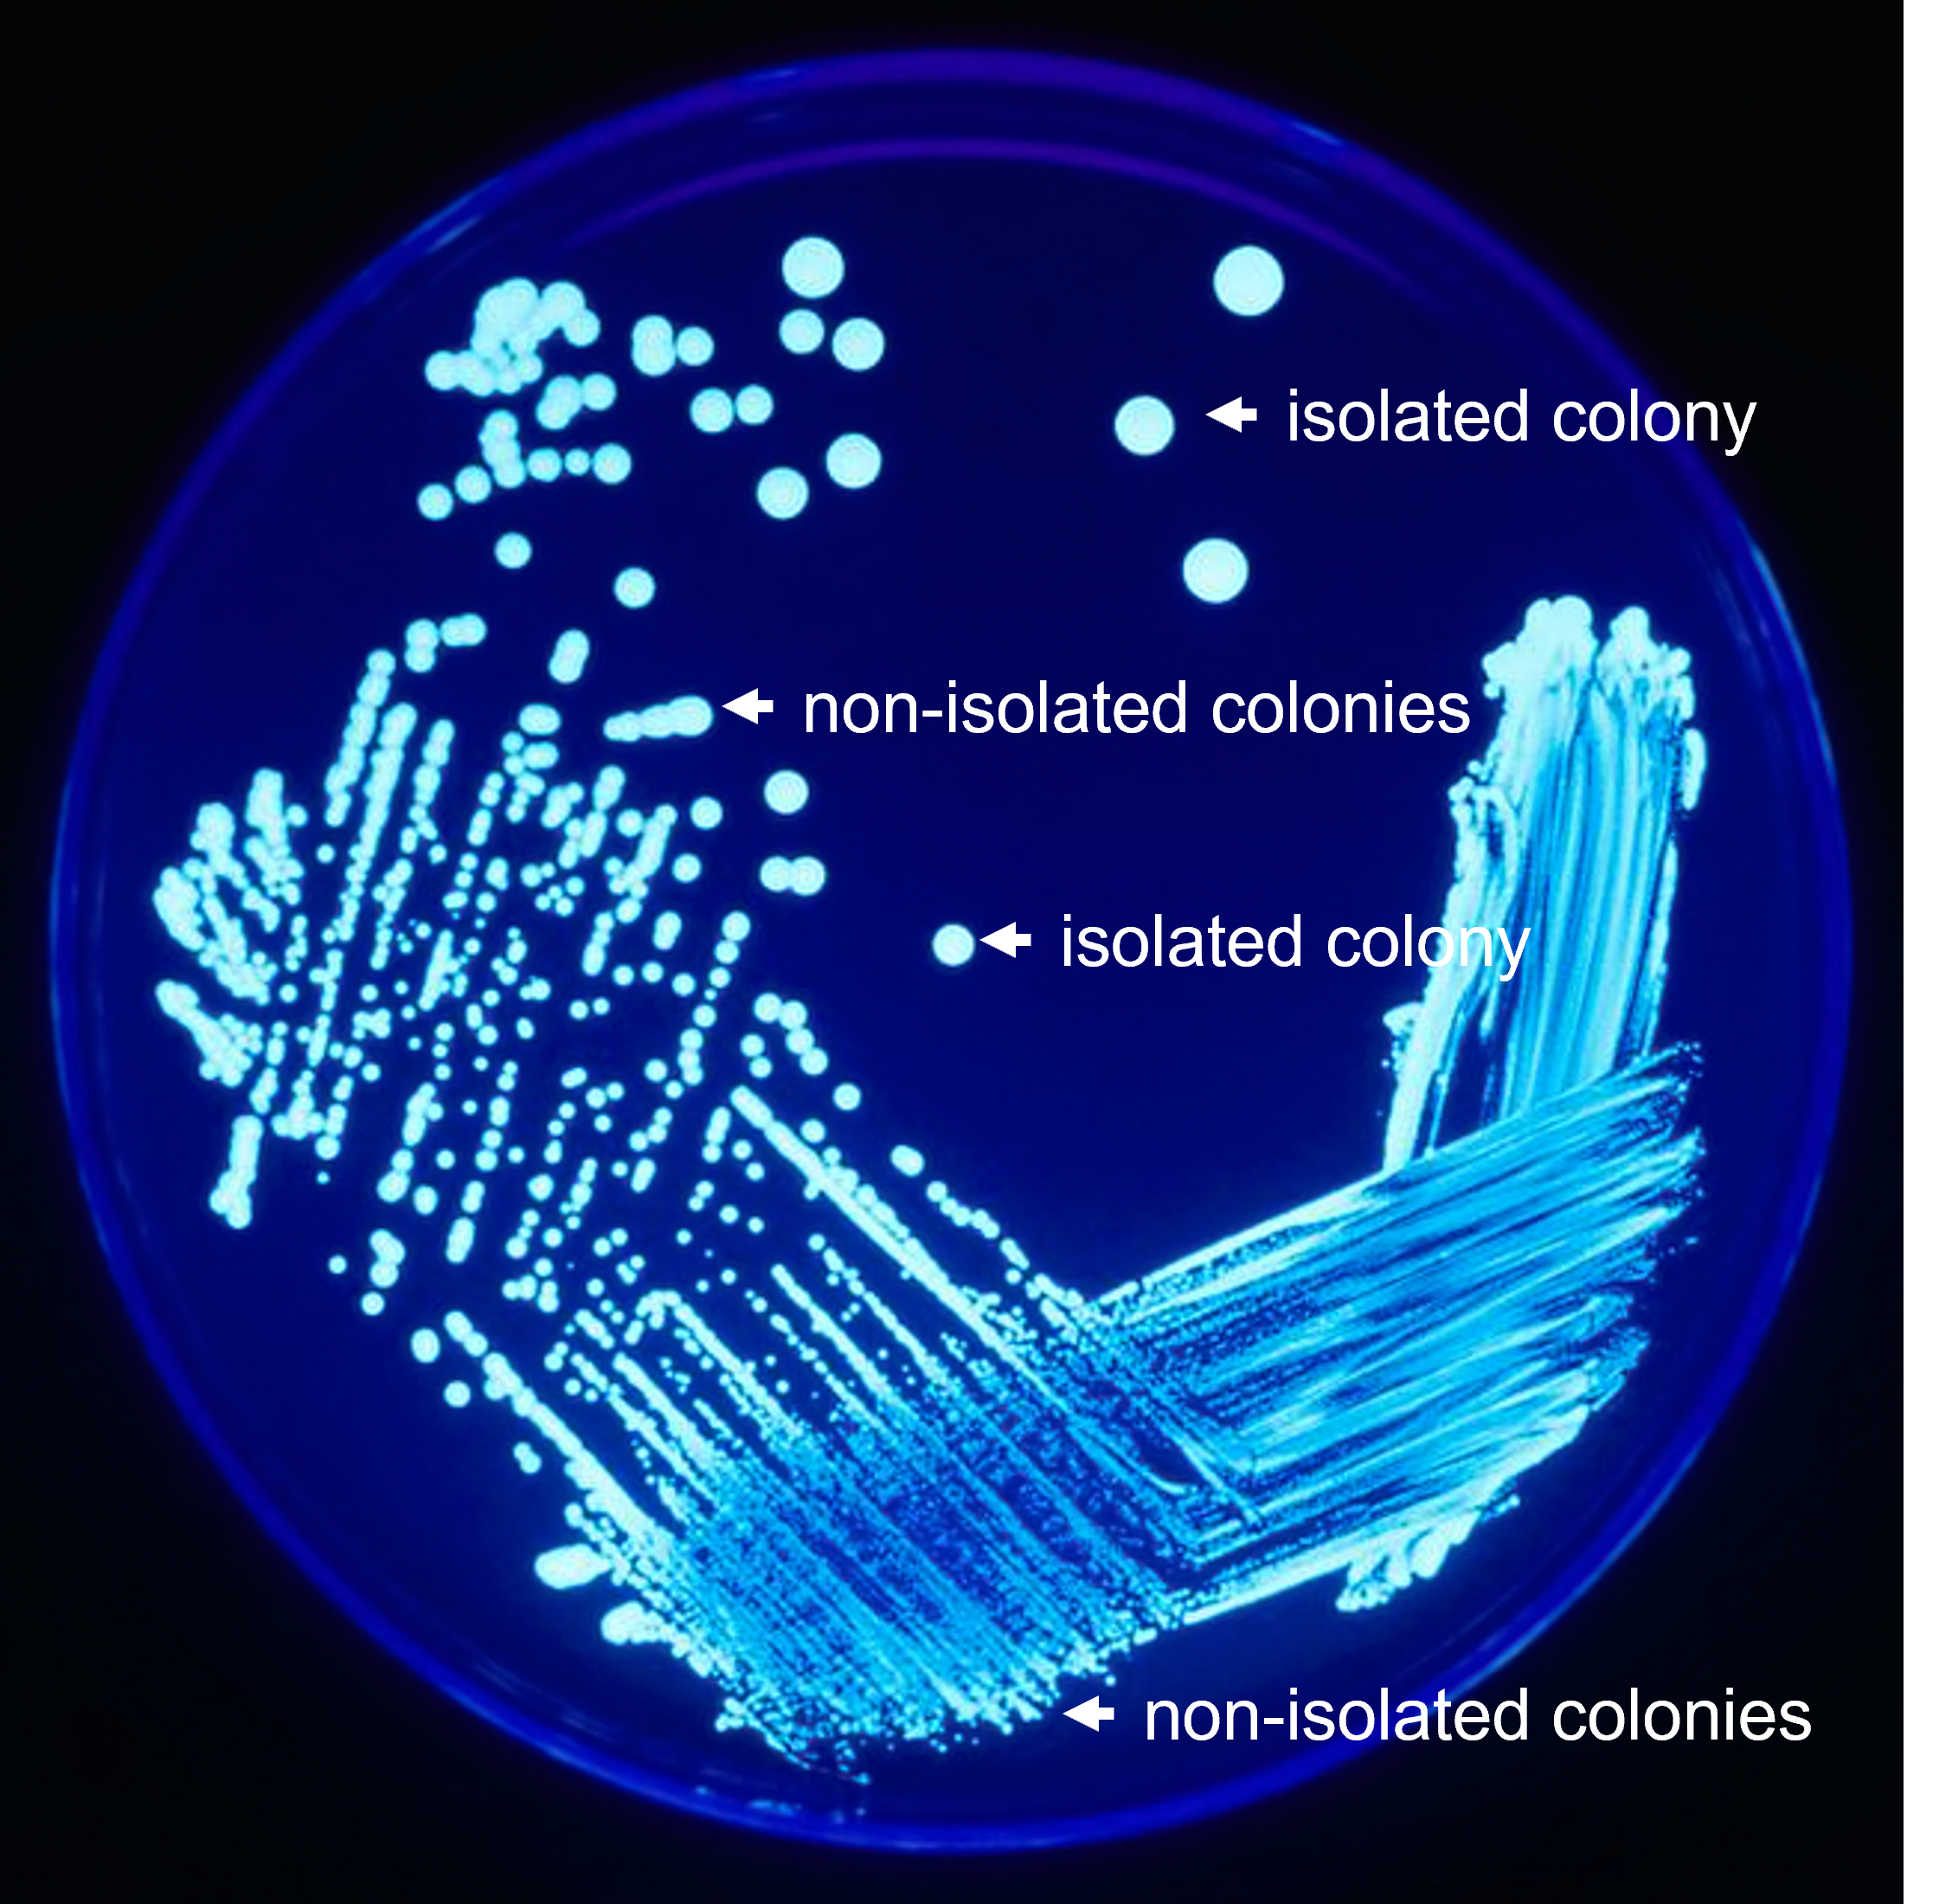 isolated and non-isolated colonies on a petri plate